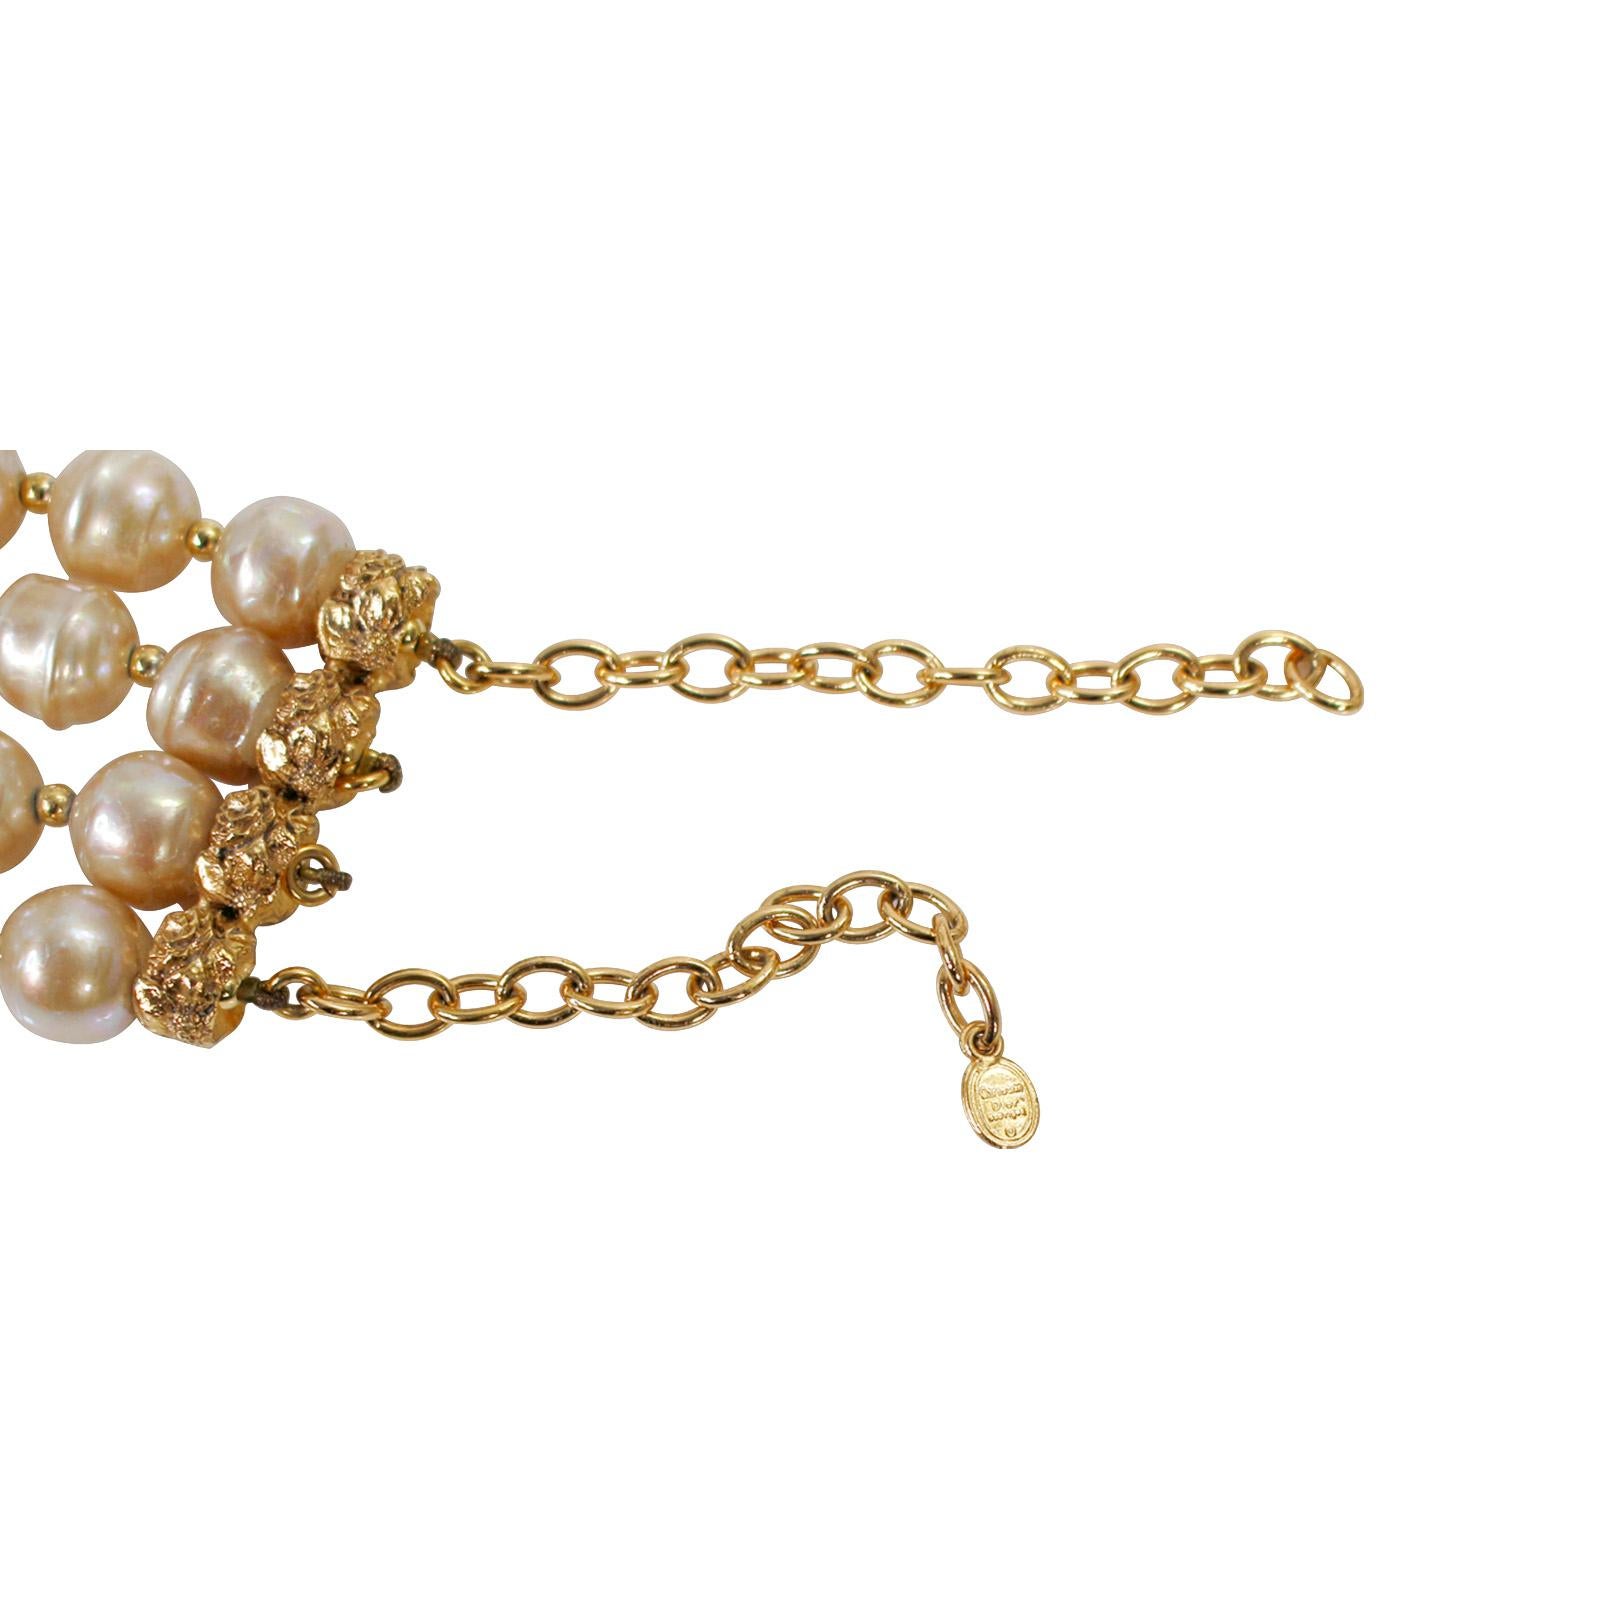 Vintage Christian Dior  Couture Gold Tone and Pearl Necklace Circa 1980s For Sale 2